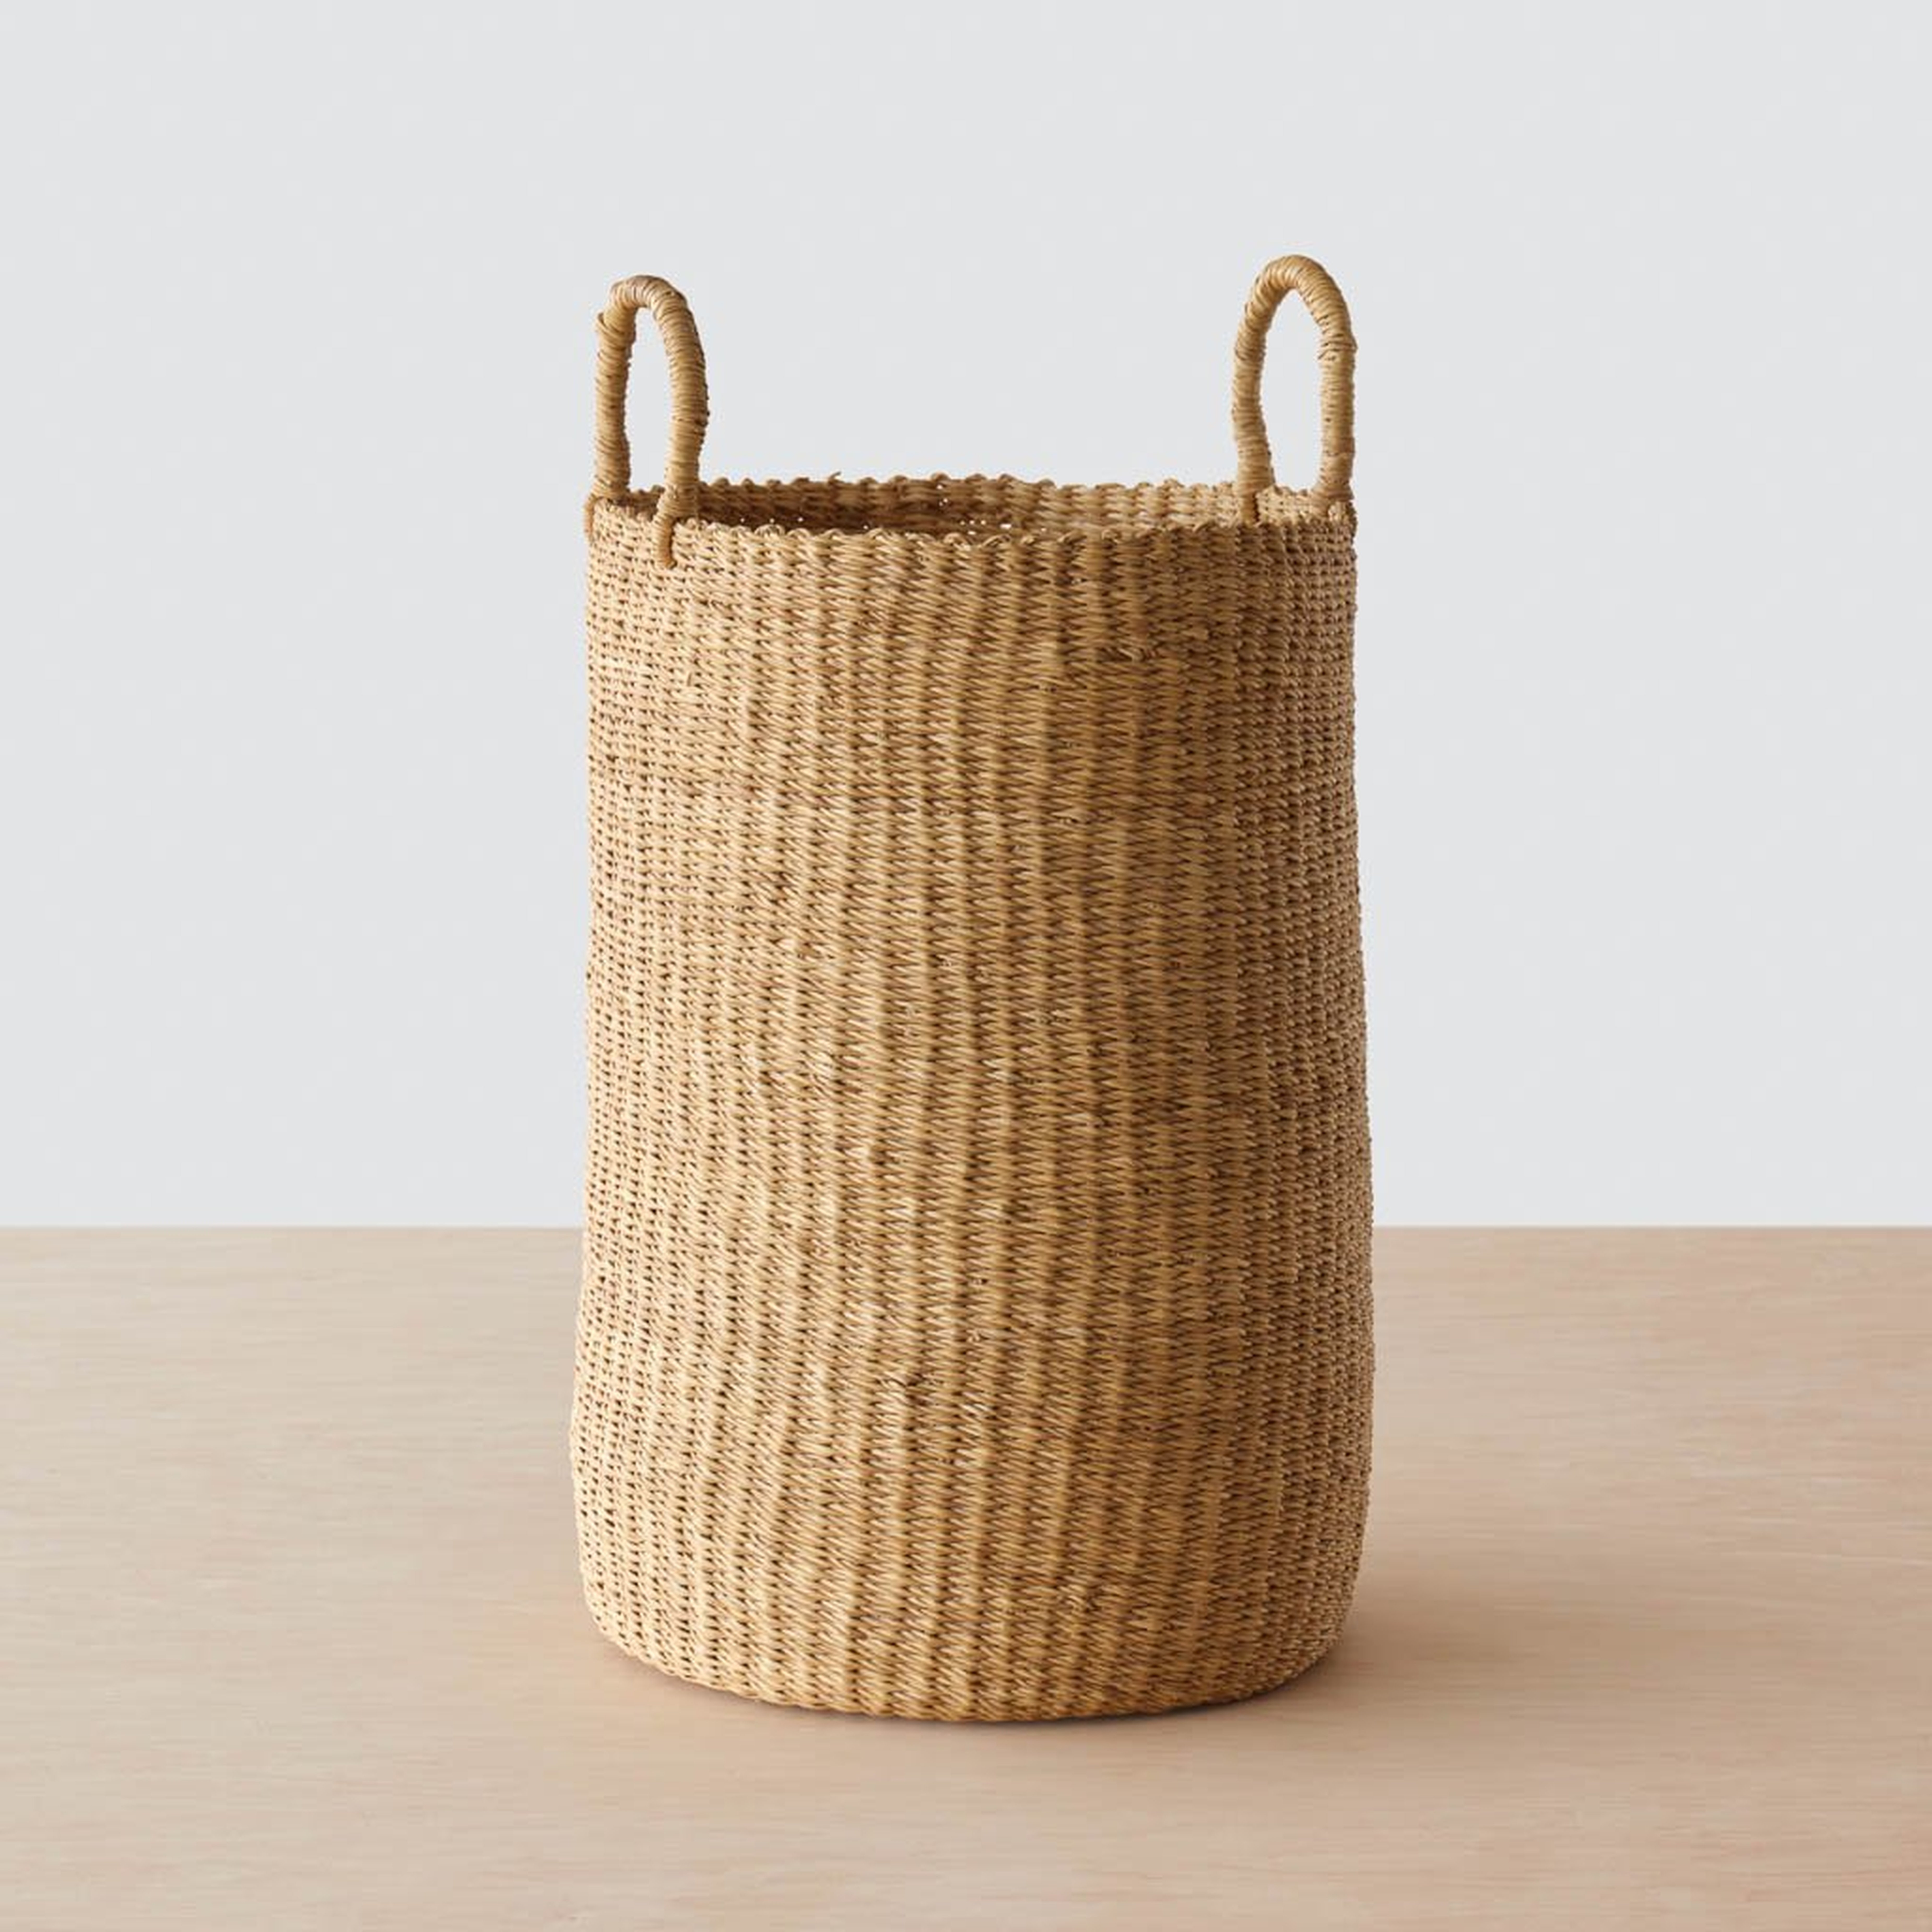 Bolga Tall Basket By The Citizenry - The Citizenry